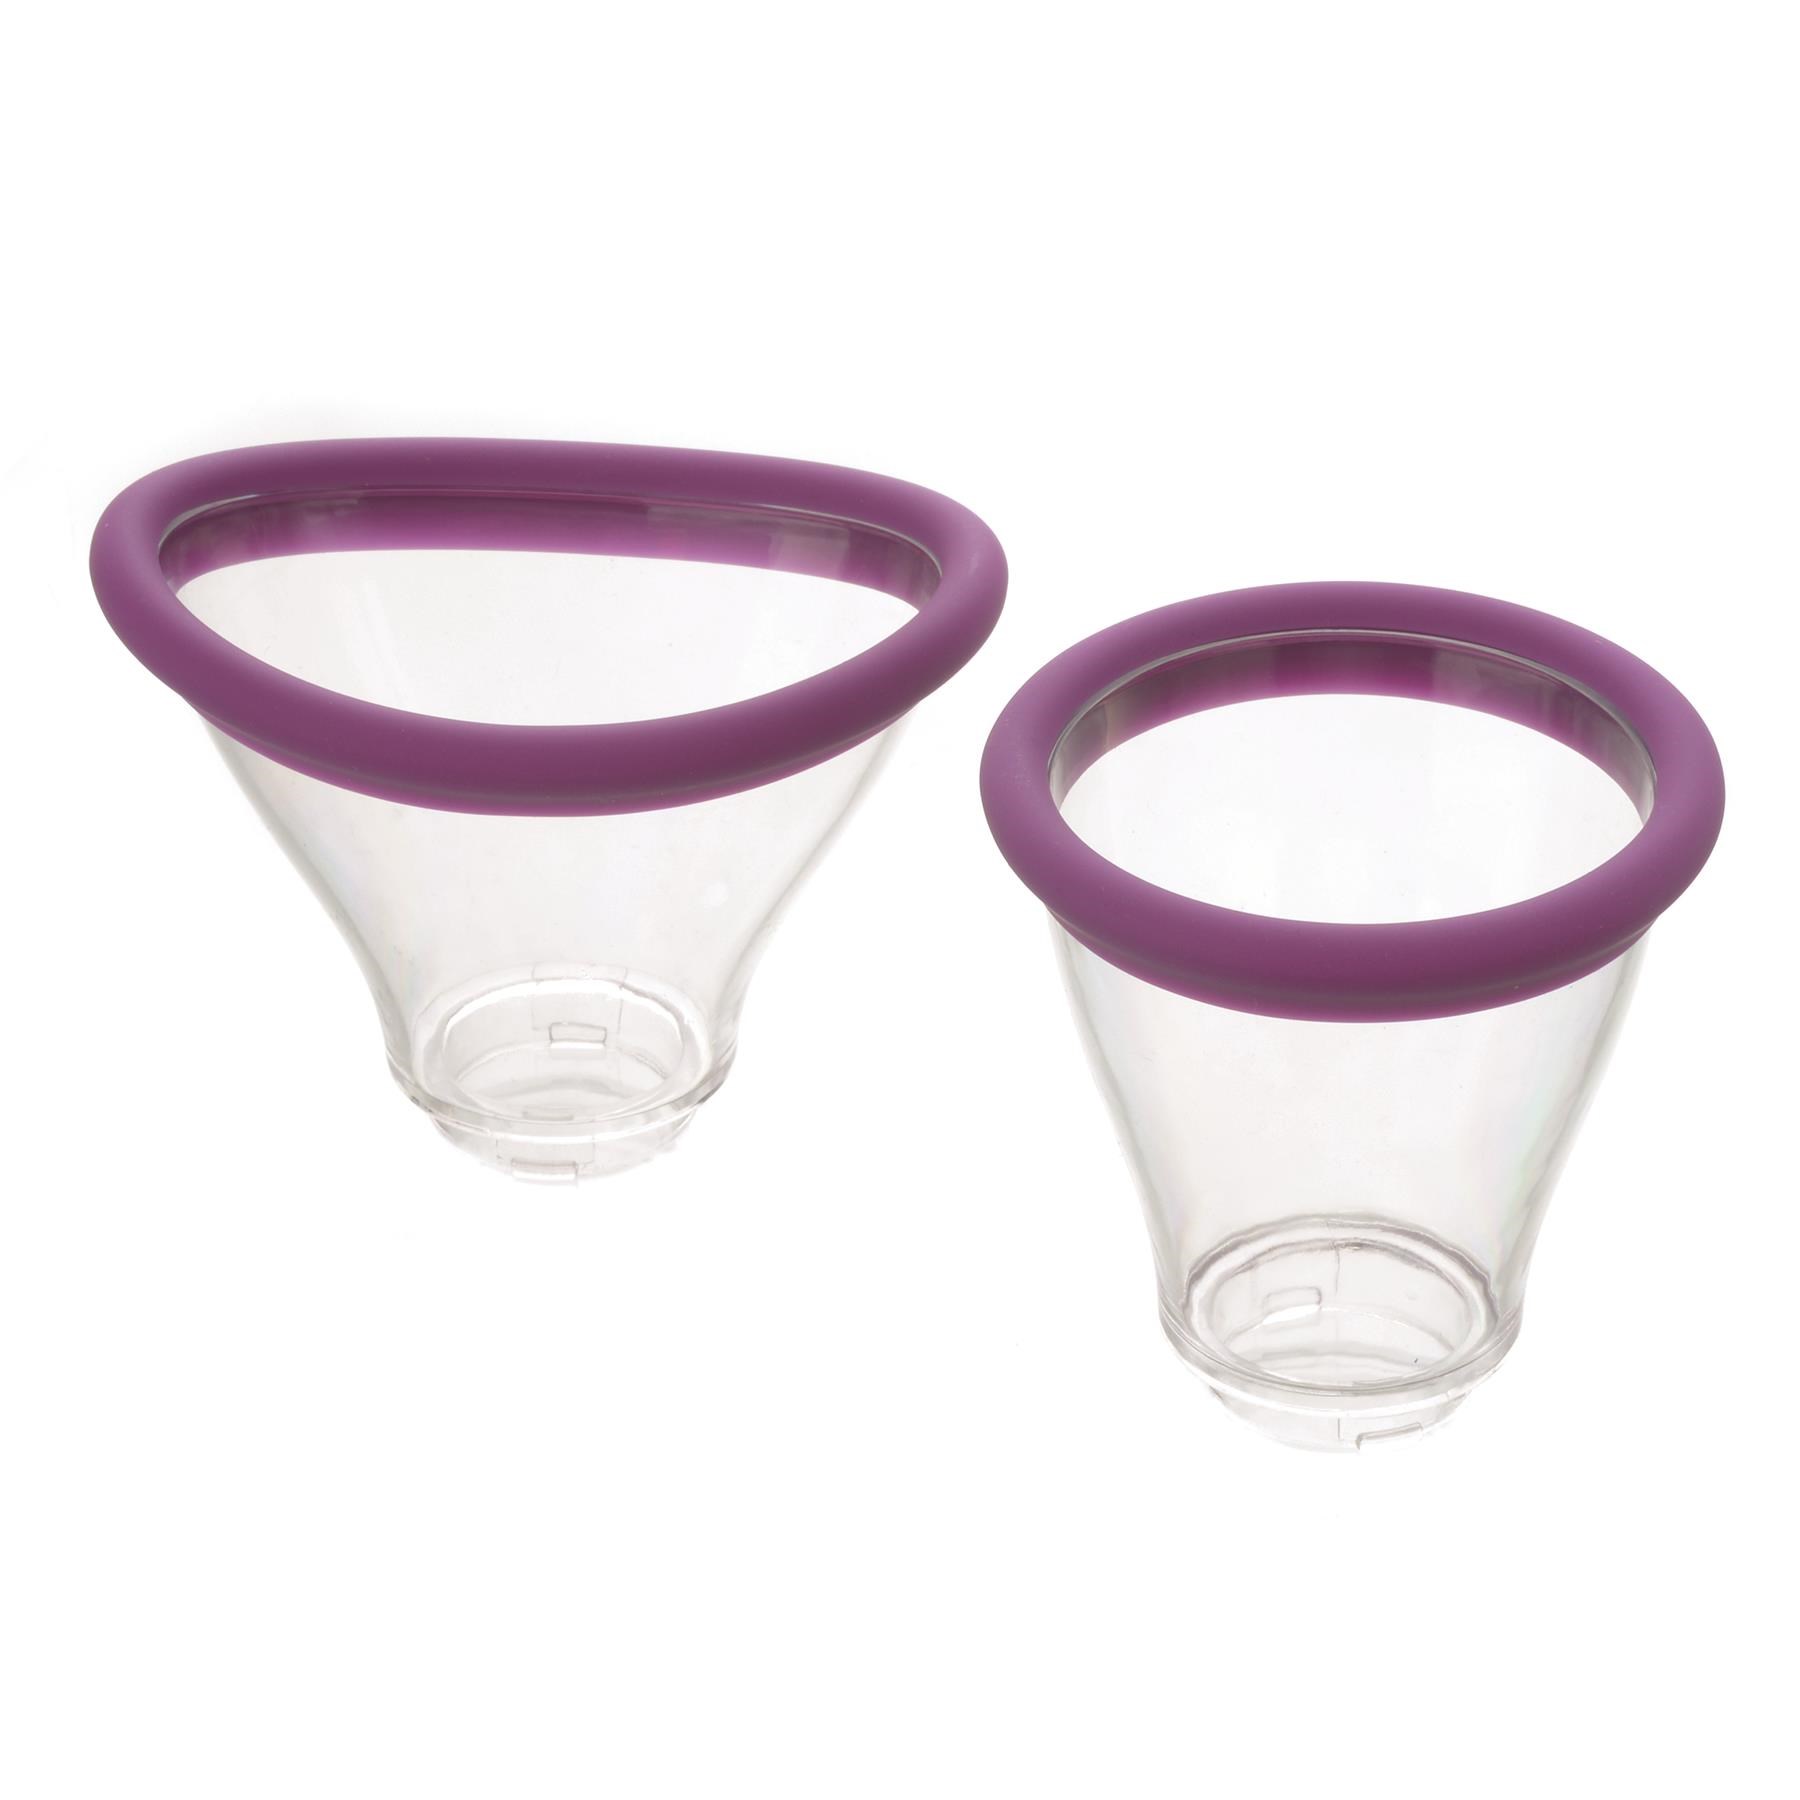 Fantasy For Her Ultimate Pleasure Pro - Showing Both Sizes of the Cups